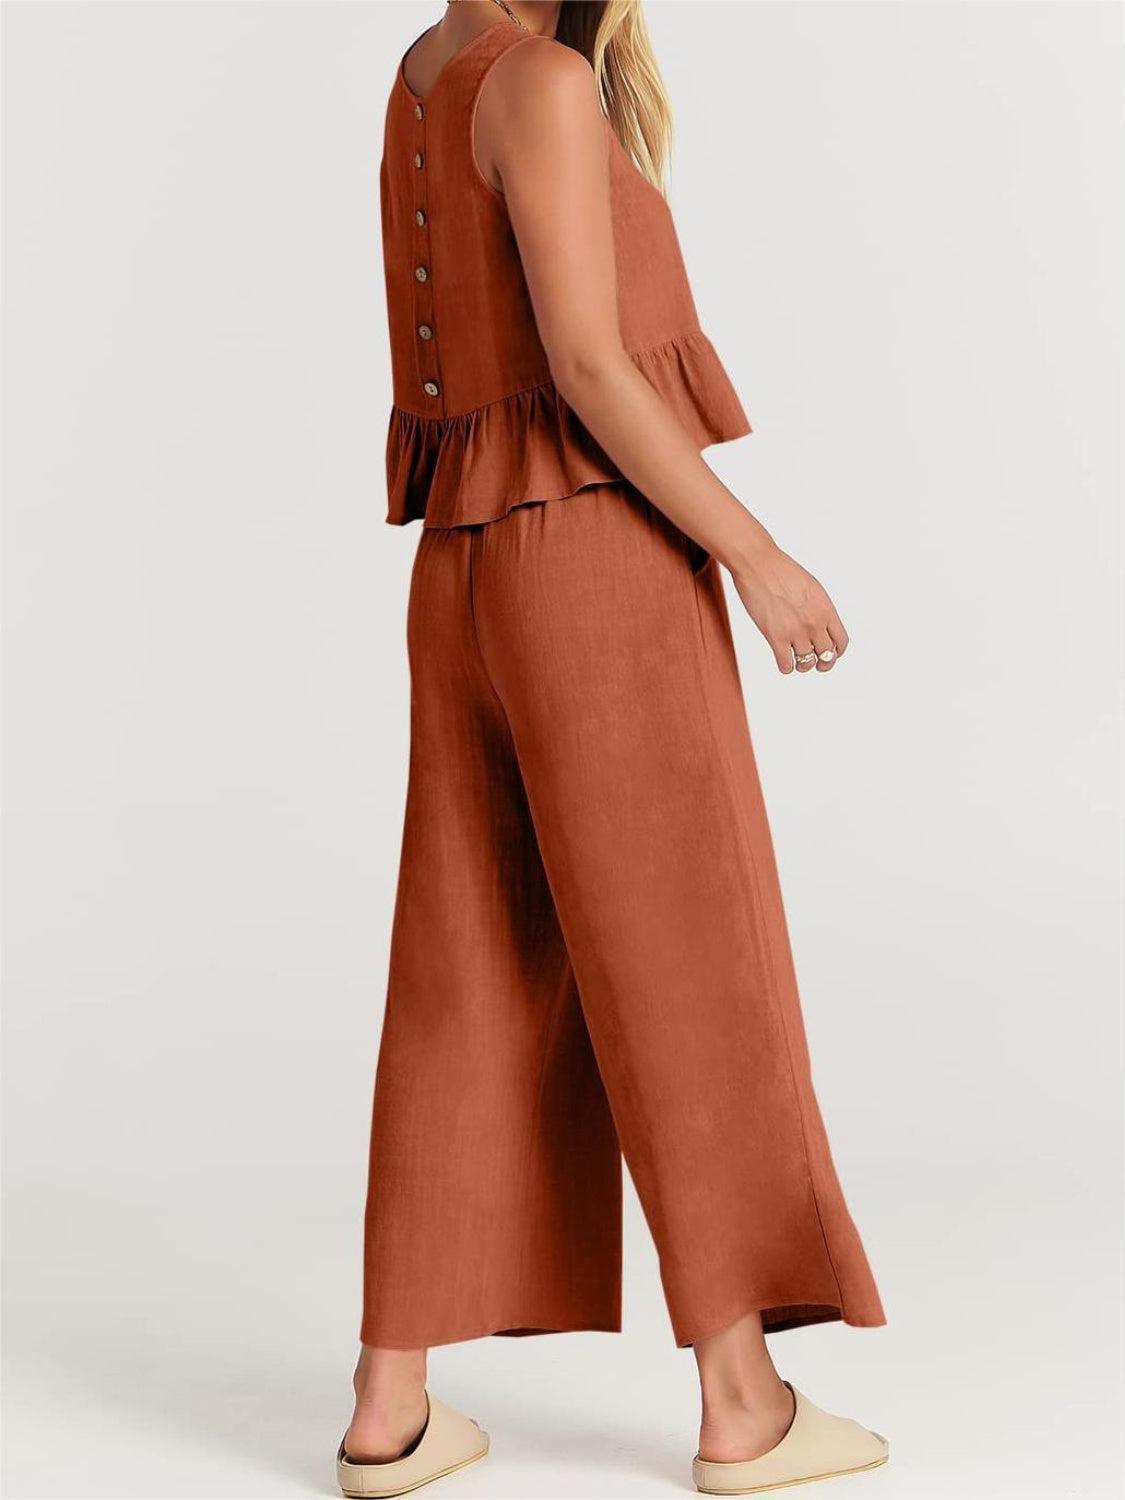 a woman wearing a brown jumpsuit with buttons